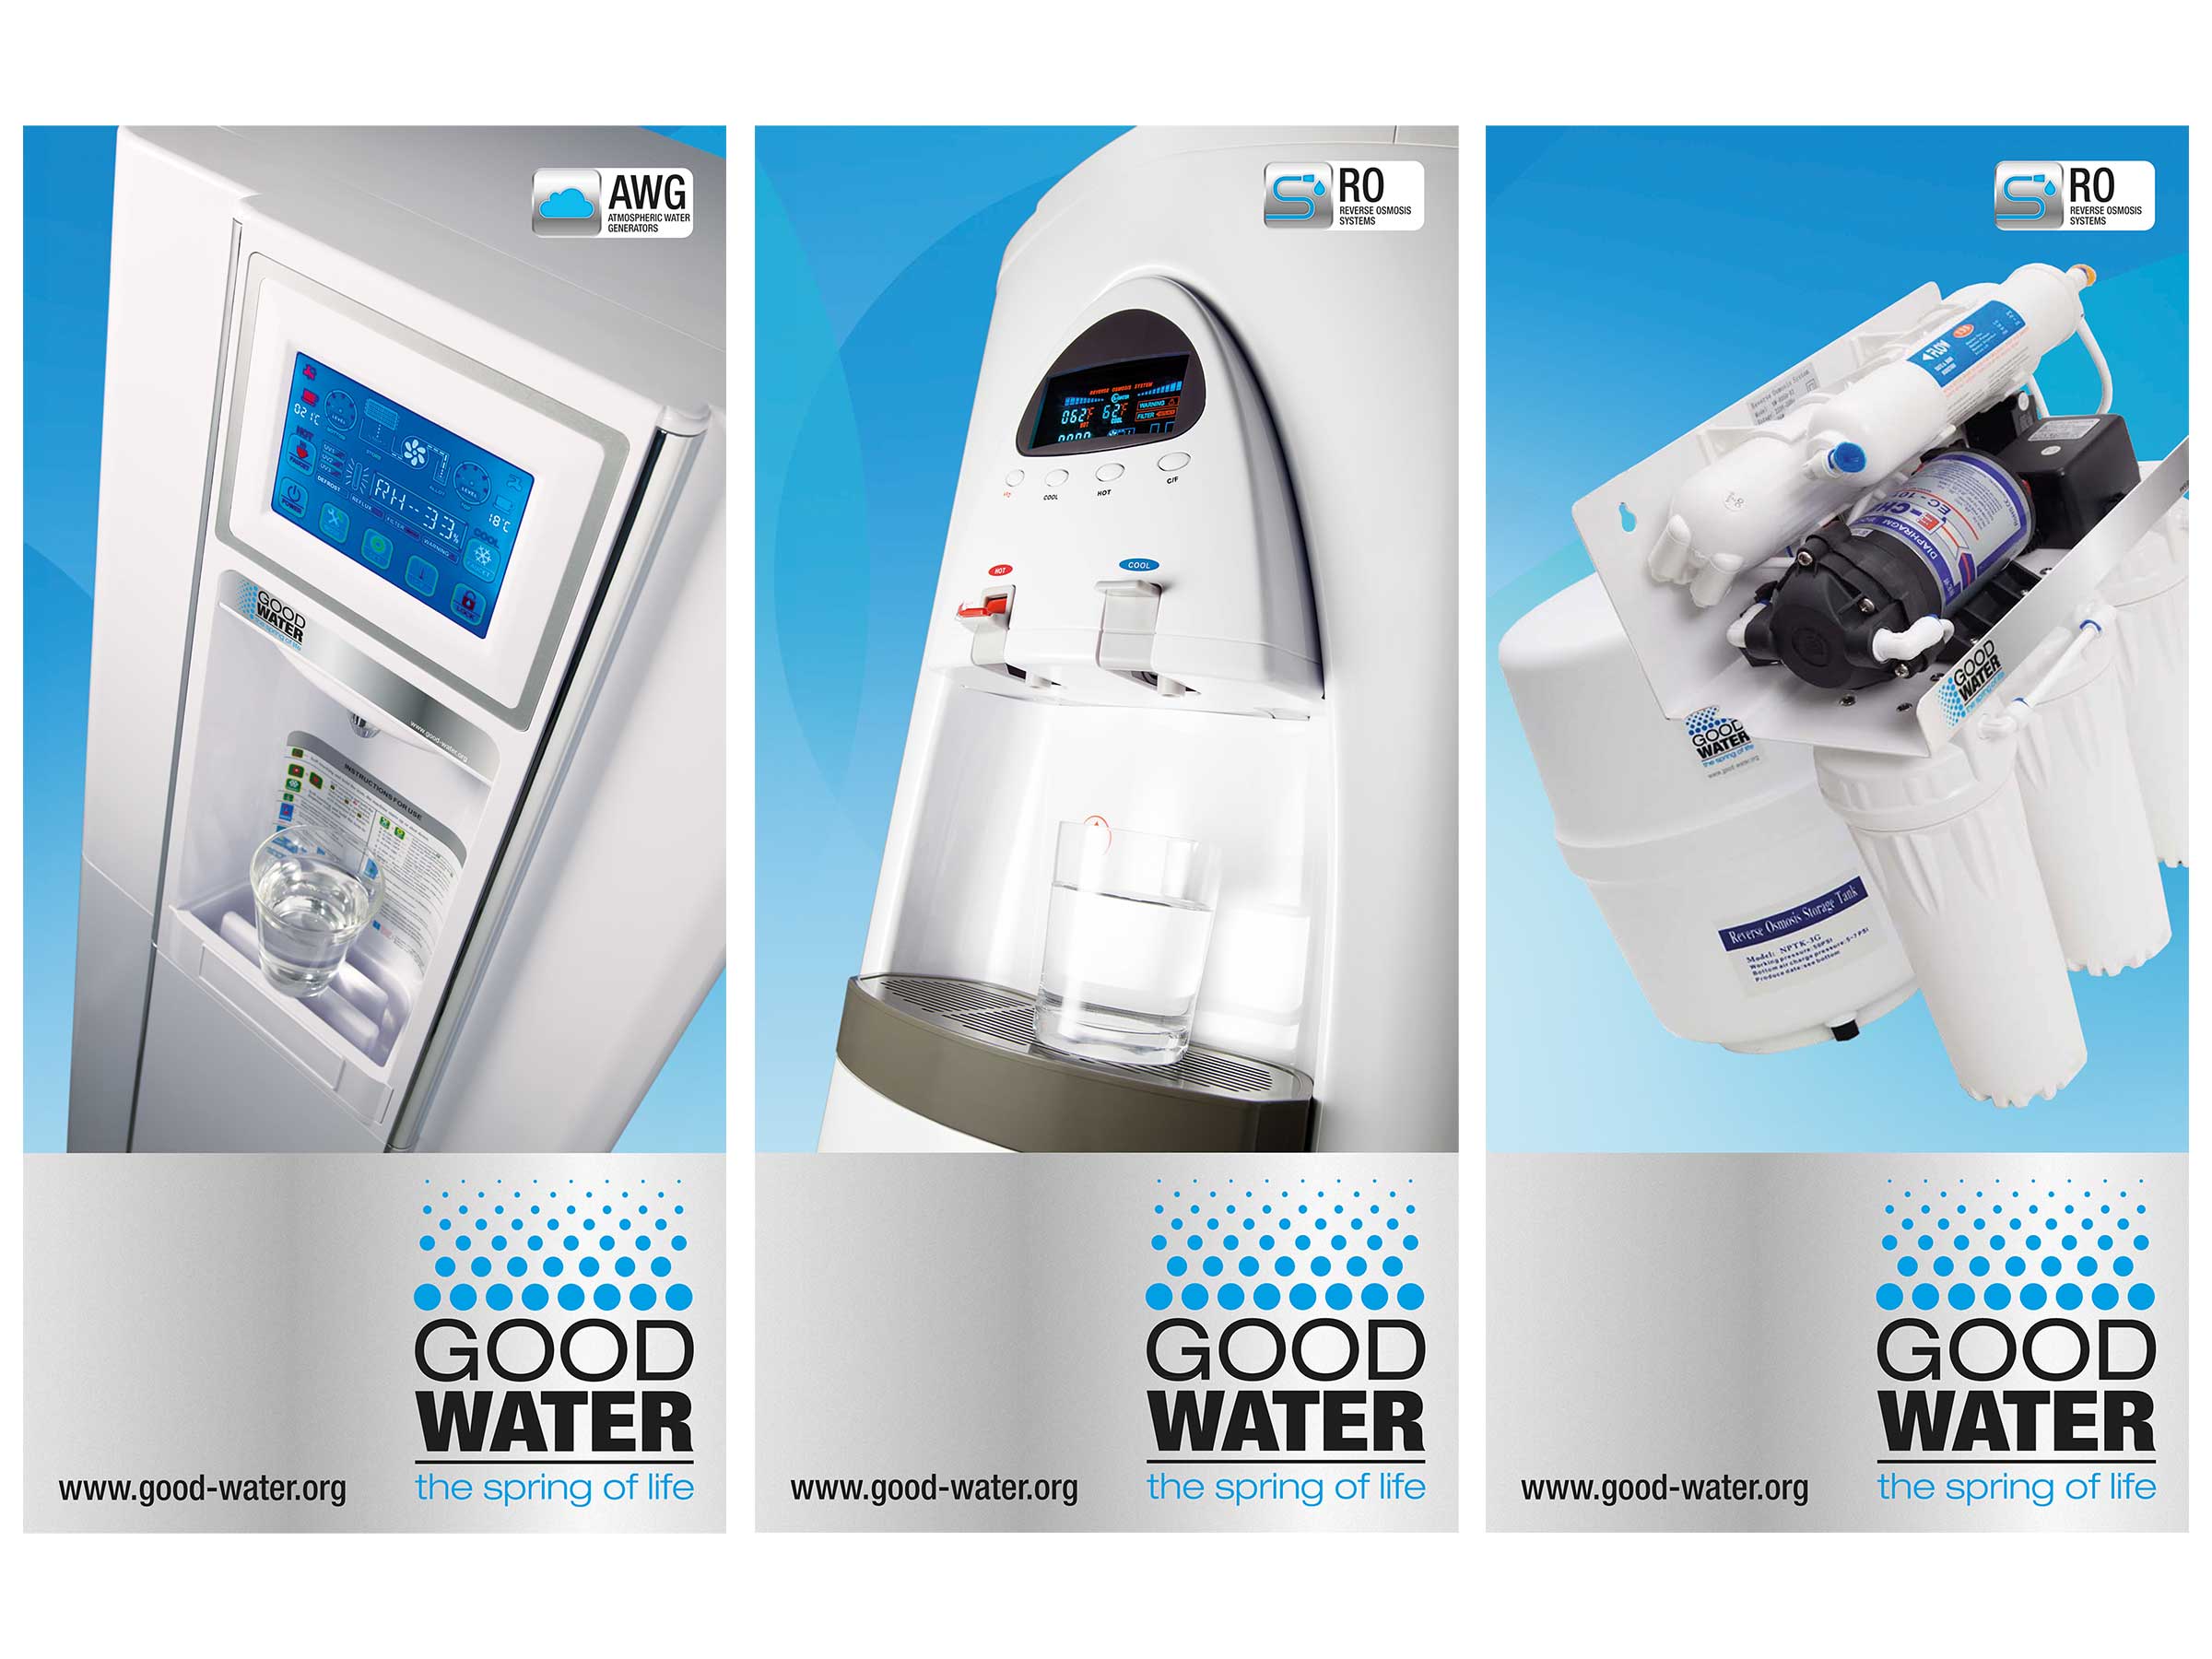 good-water-the-spring-of-life-water-technology-displays